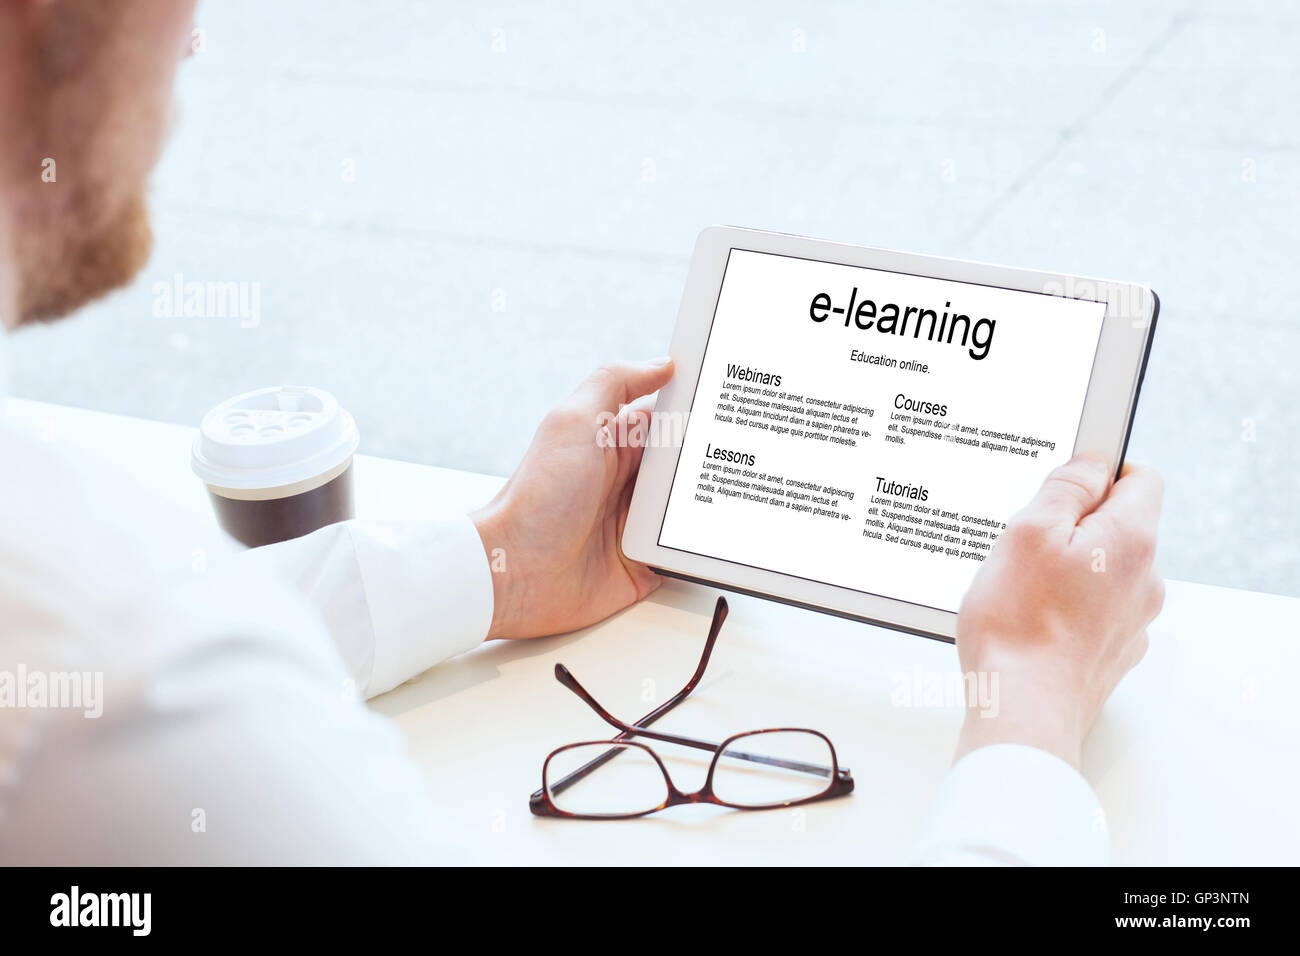 e-learning, business education online, hands with tablet Stock Photo